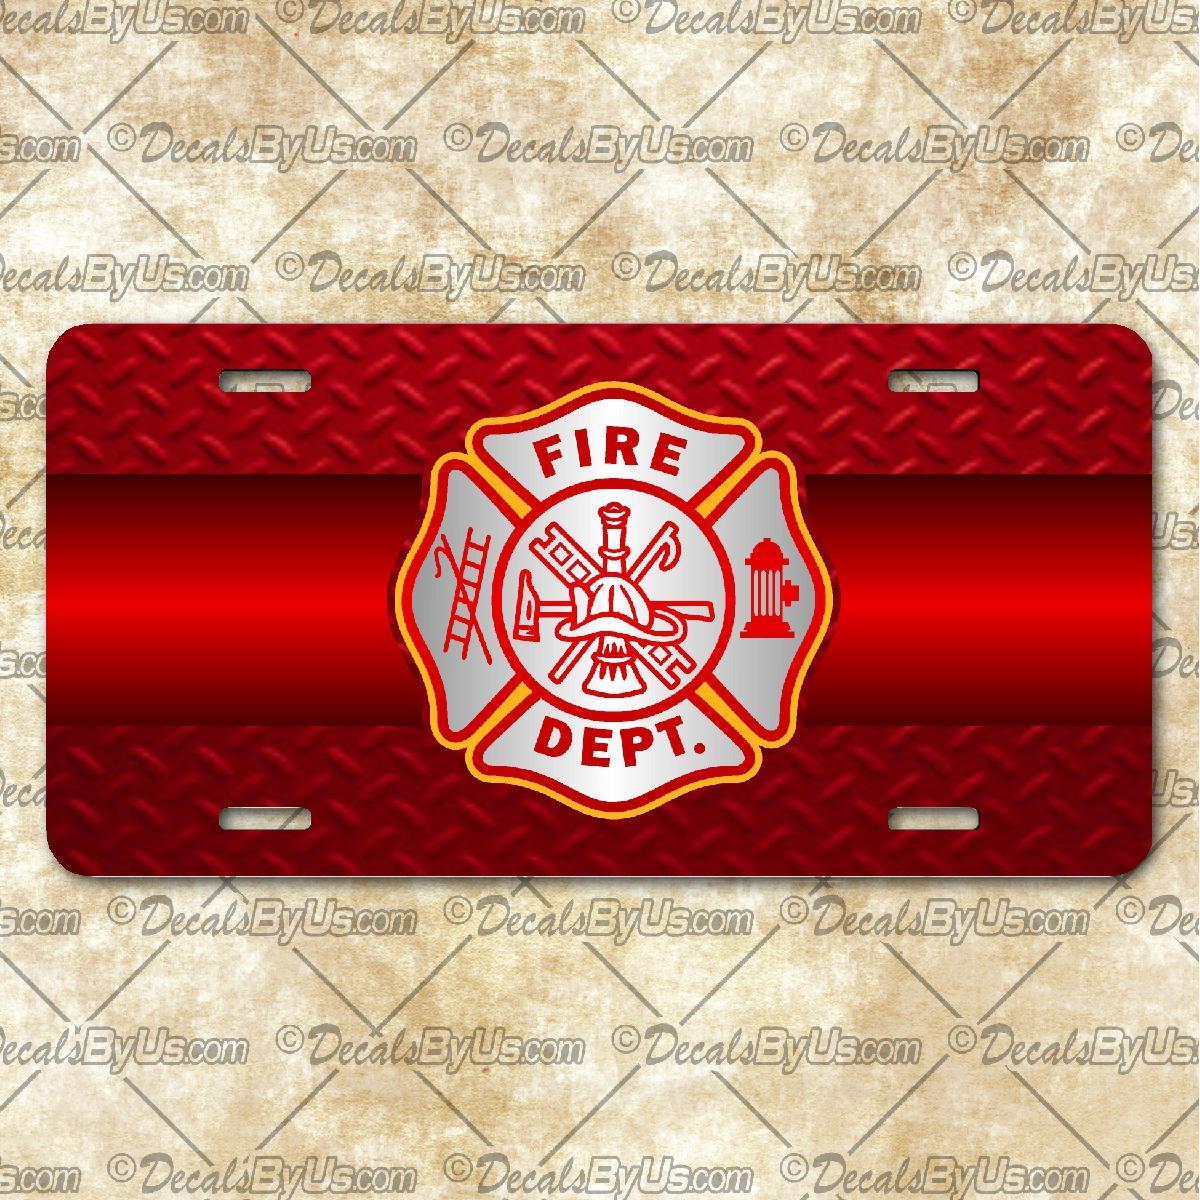 Red Diamond Car Logo - Best Prices on Fire department License Plates, Fire fighter Car tags